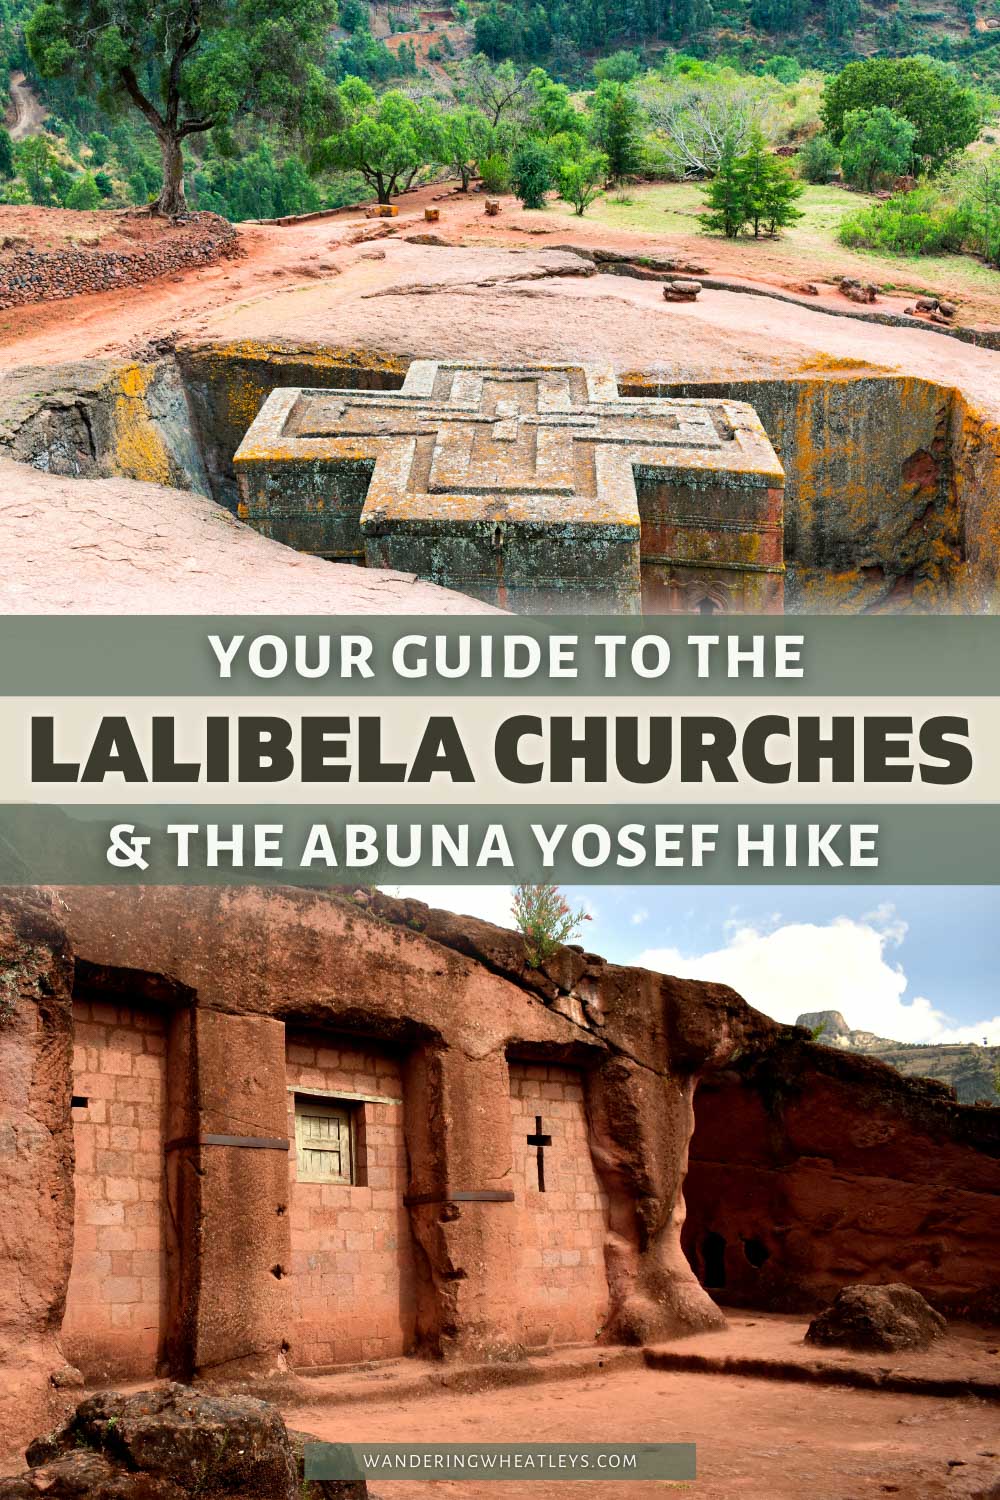 Guide to the Lalibela Churches